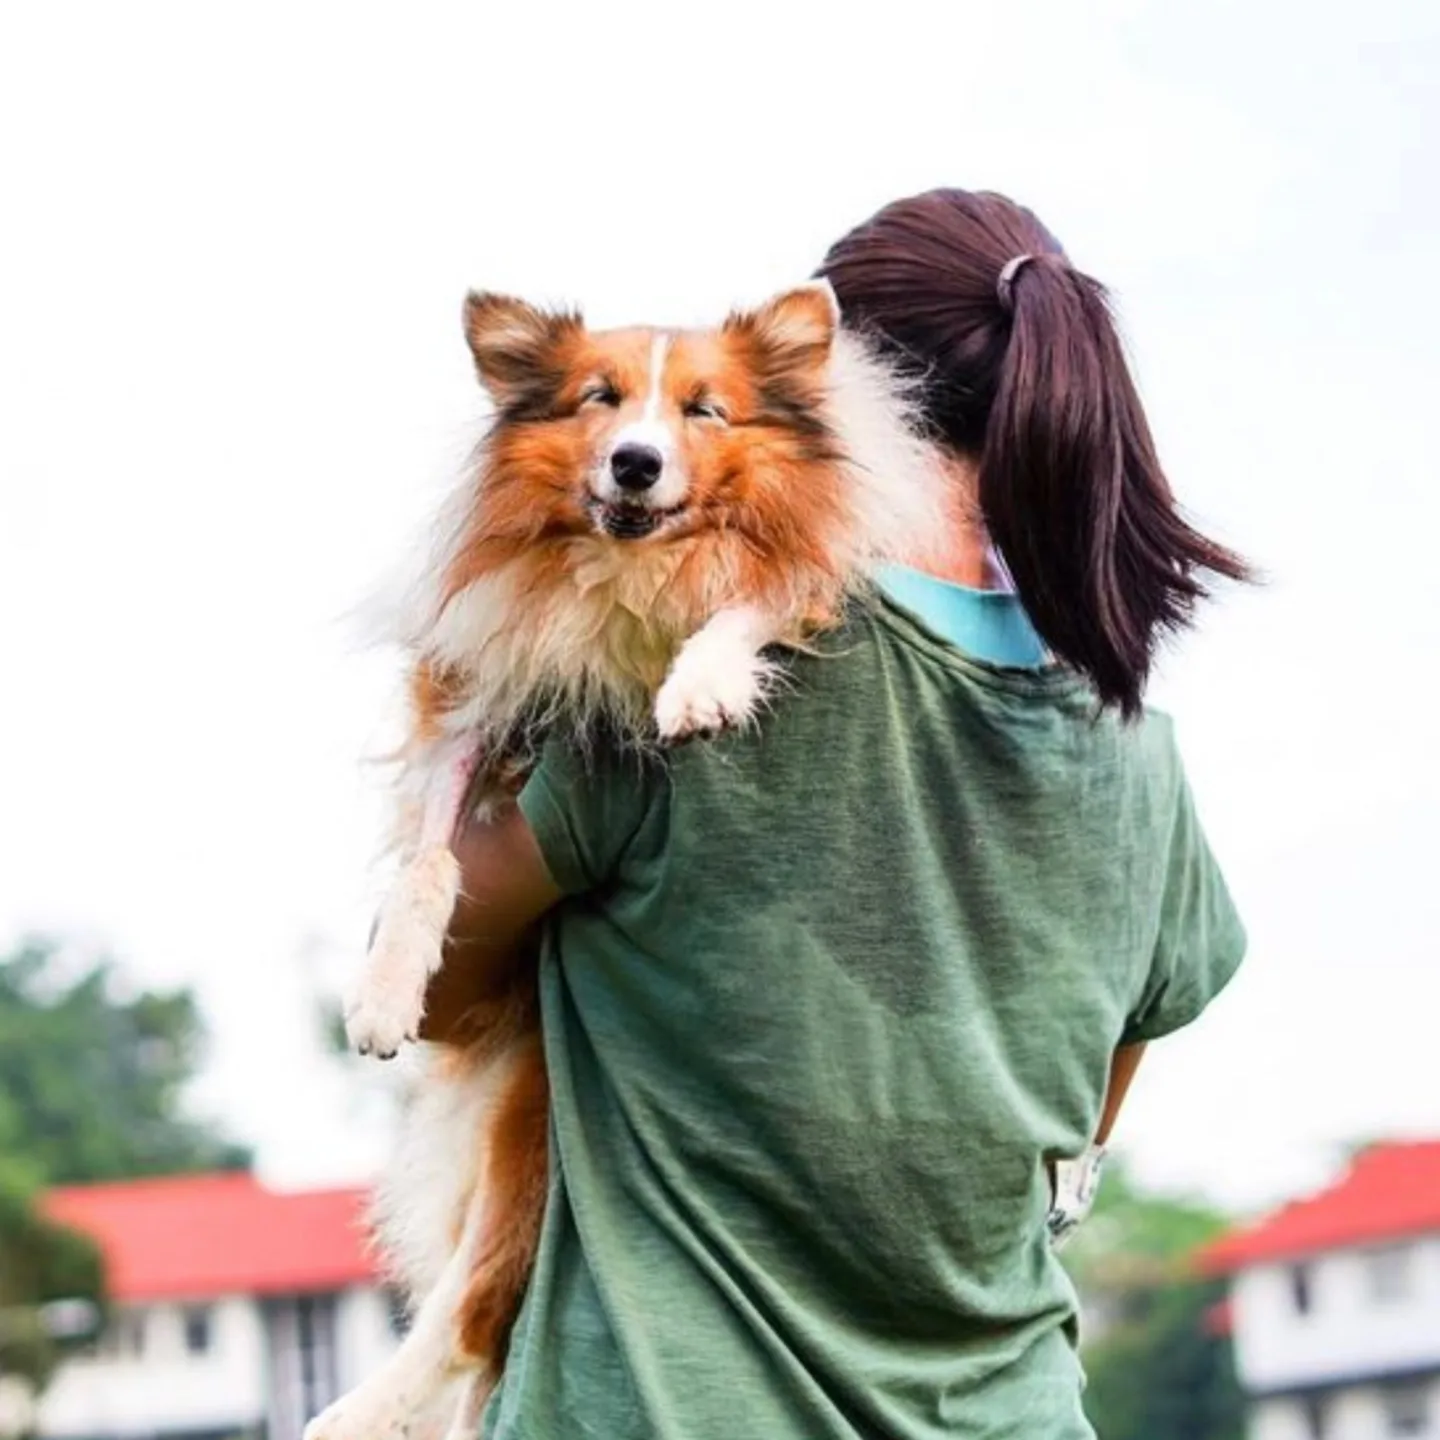 One of the velcro dog breeds is also the shetland sheepdog